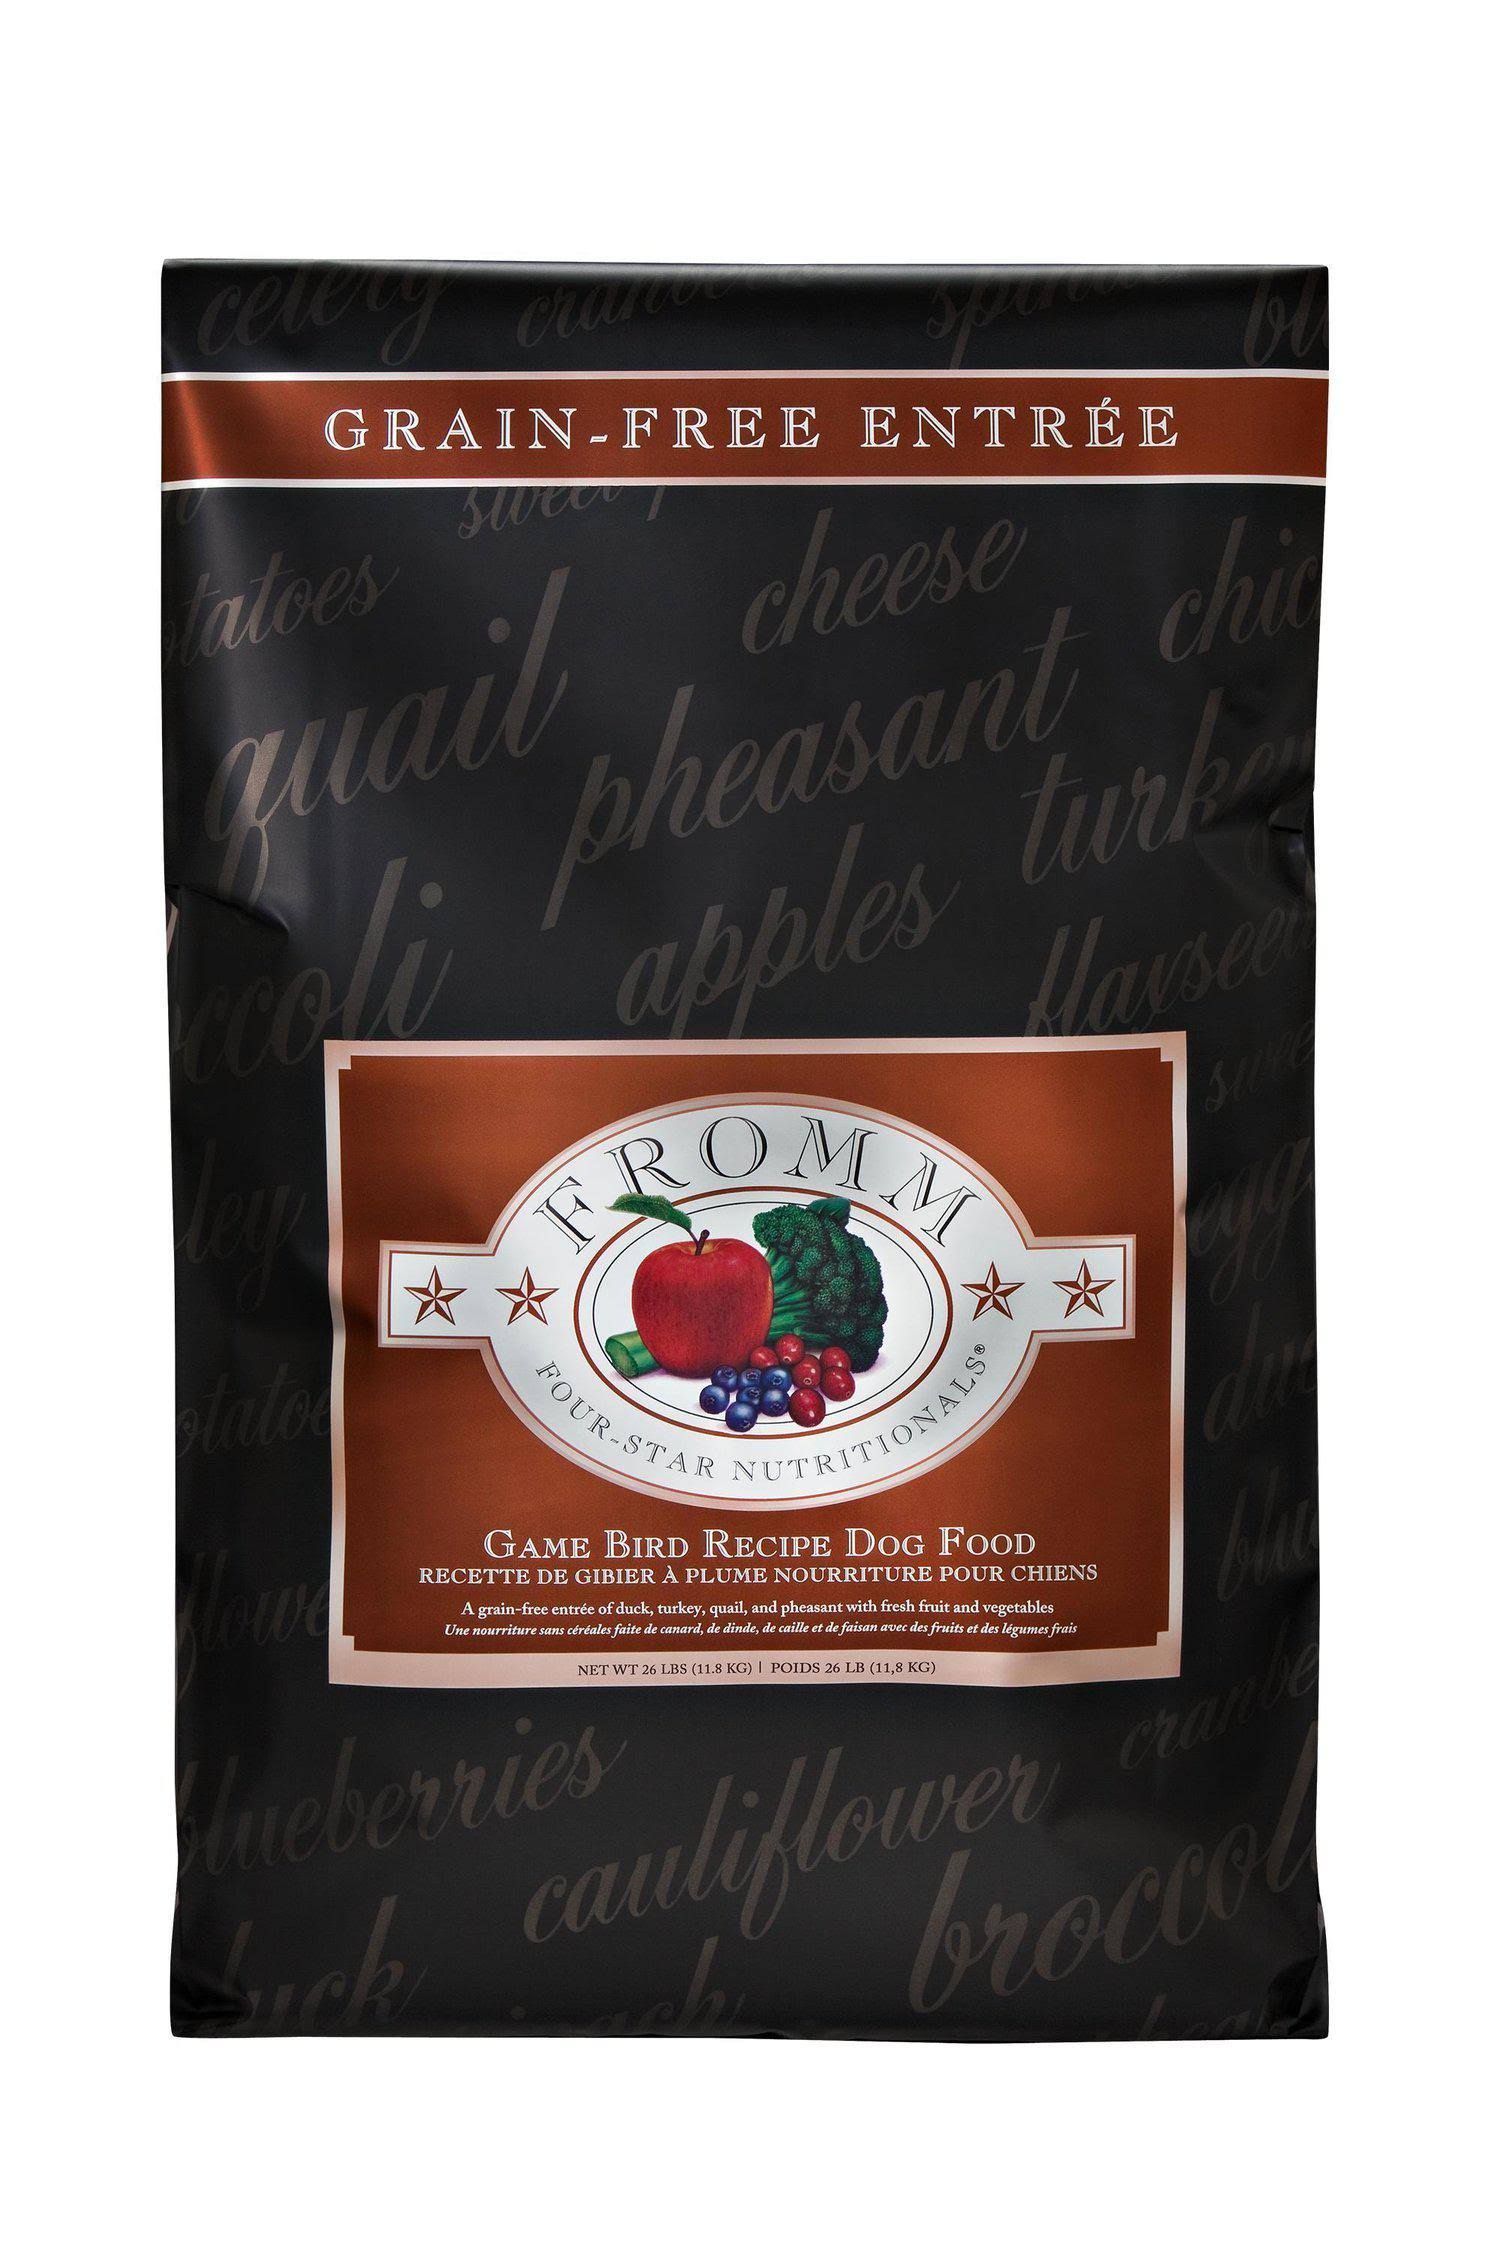 Fromm Dog Food - Game Bird